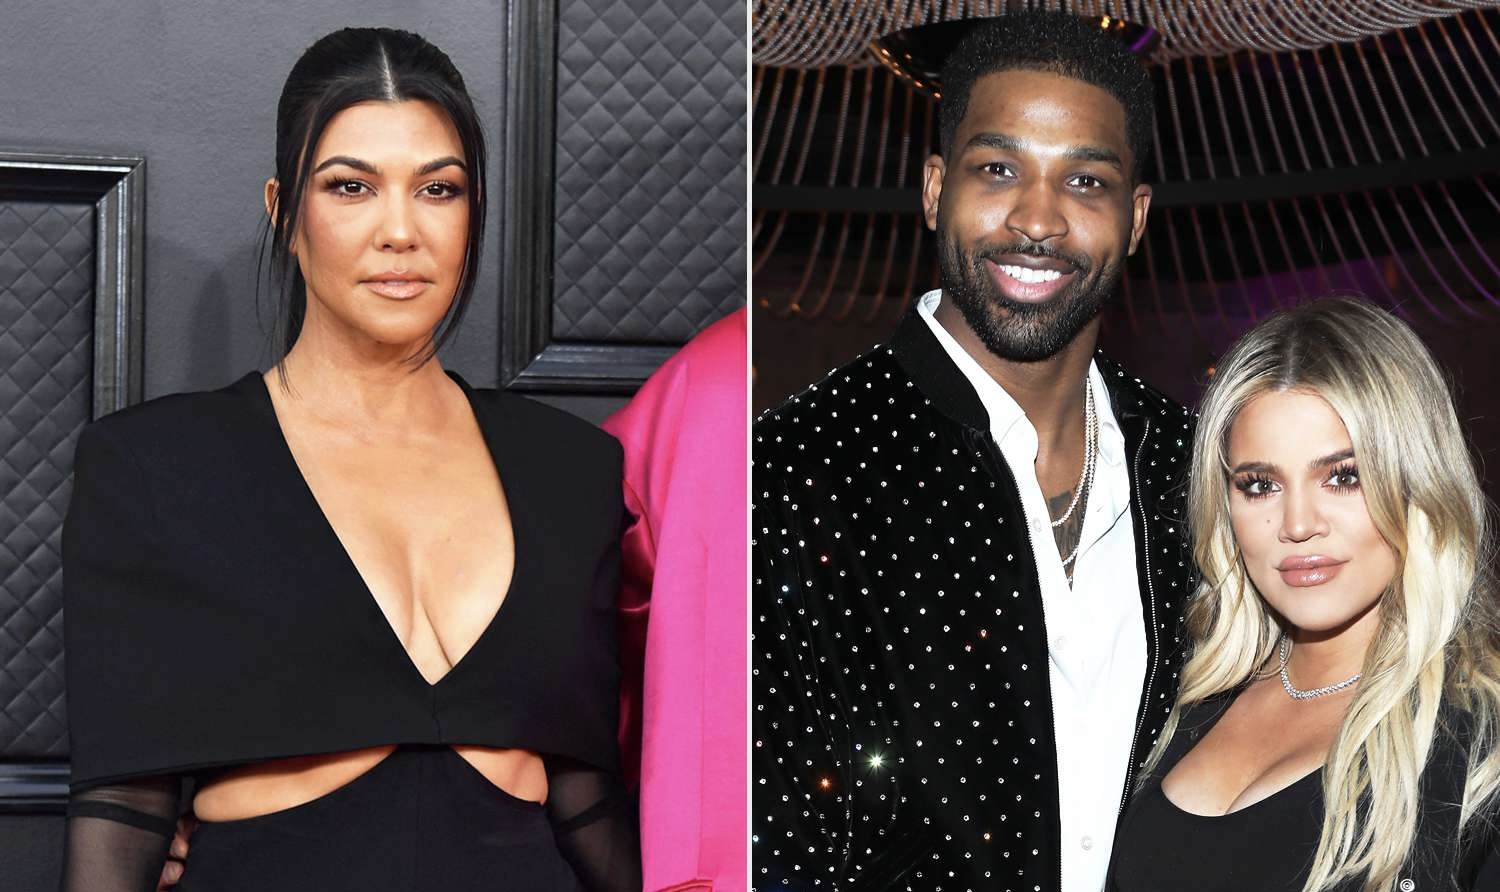 Kourtney Kardashian ‘Can’t Fake it’ with Tristan Thompson: We ‘Have Not Connected’